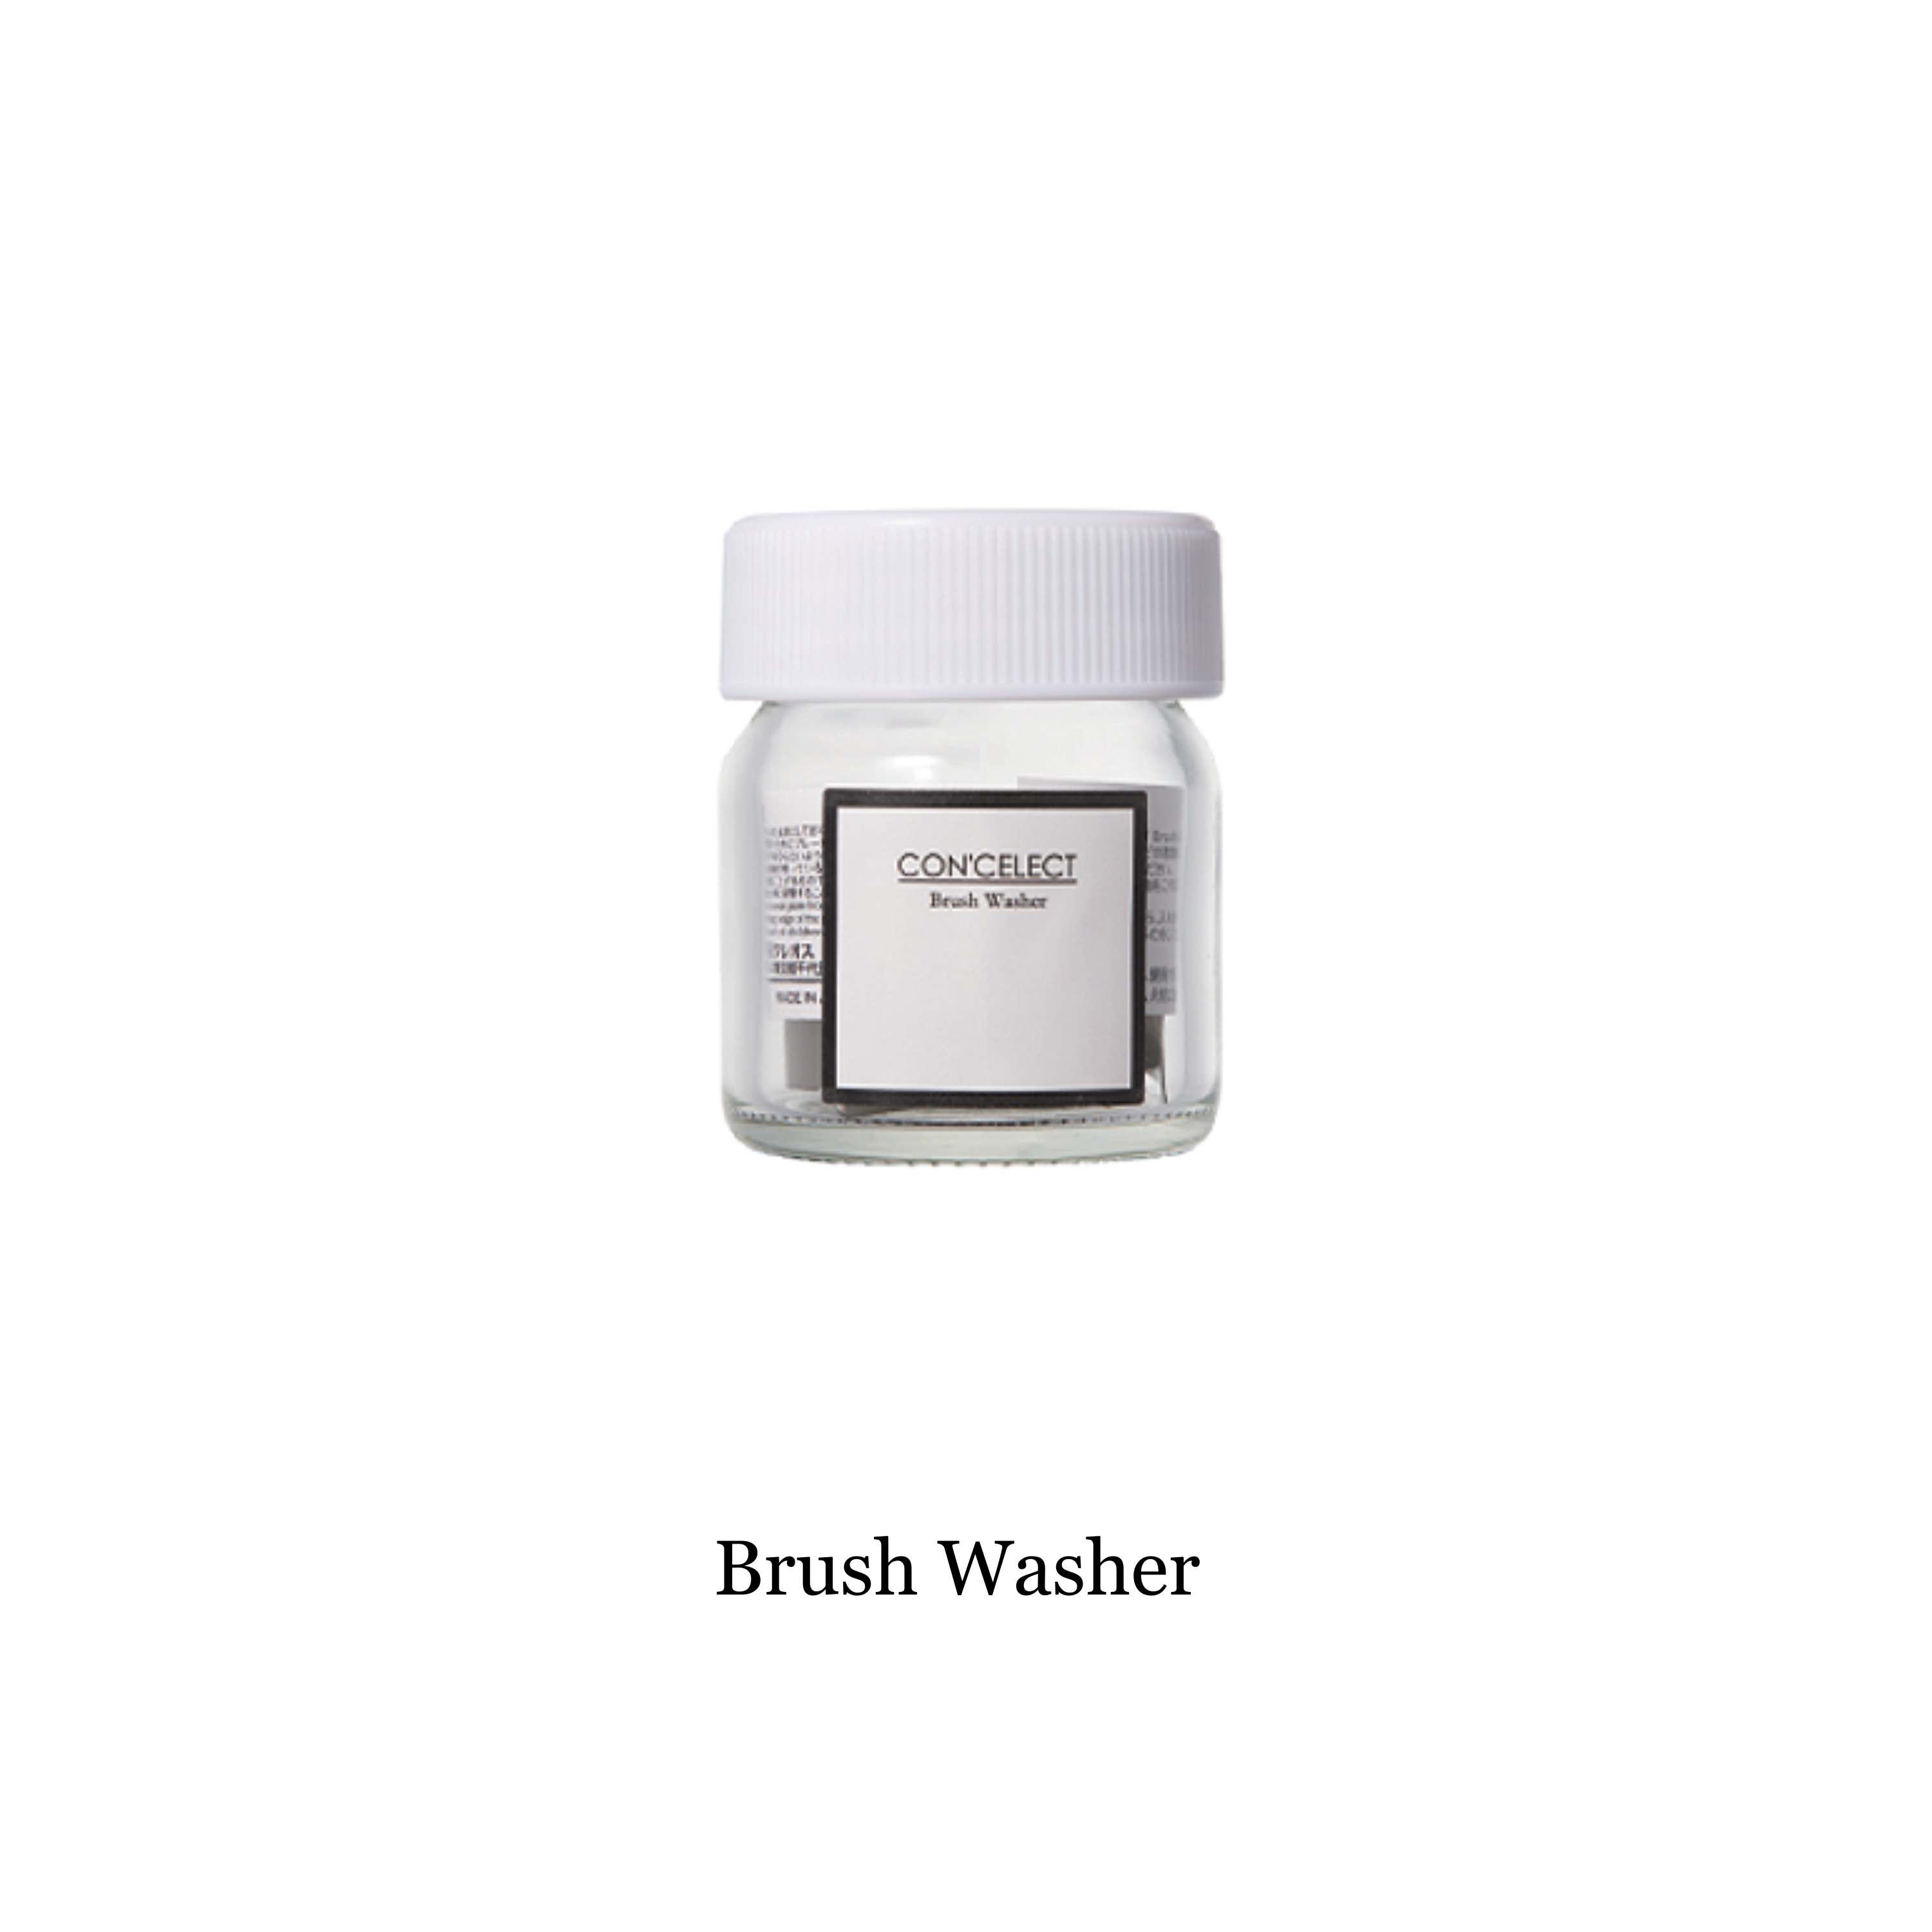 CON'CELECT Brush Washer